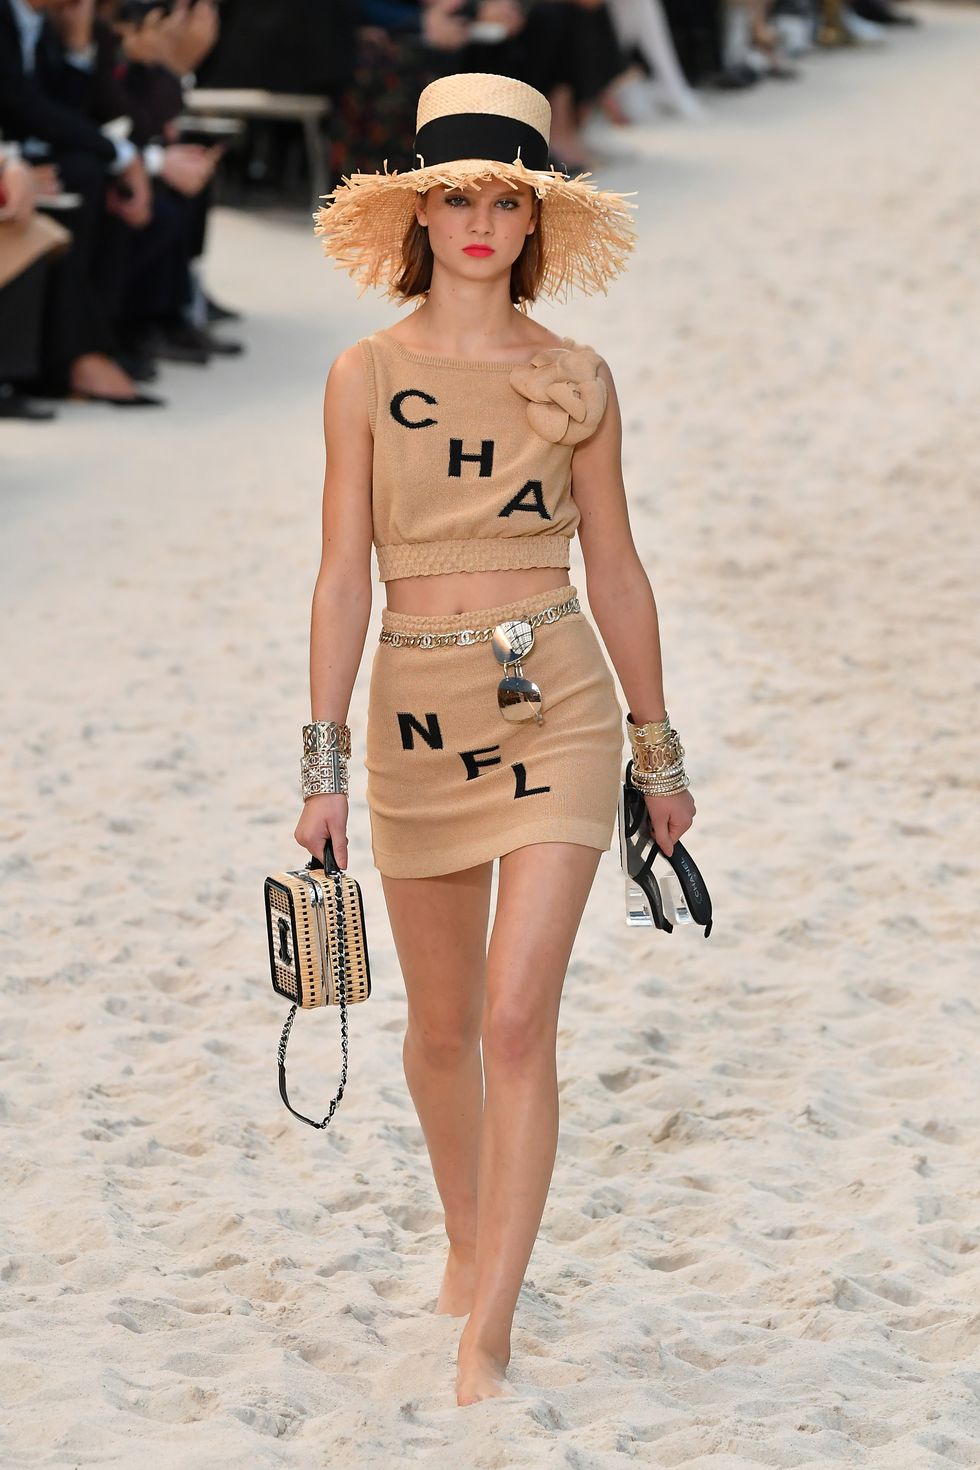 Chanel Investment Bag Guide: Sizing and Styles